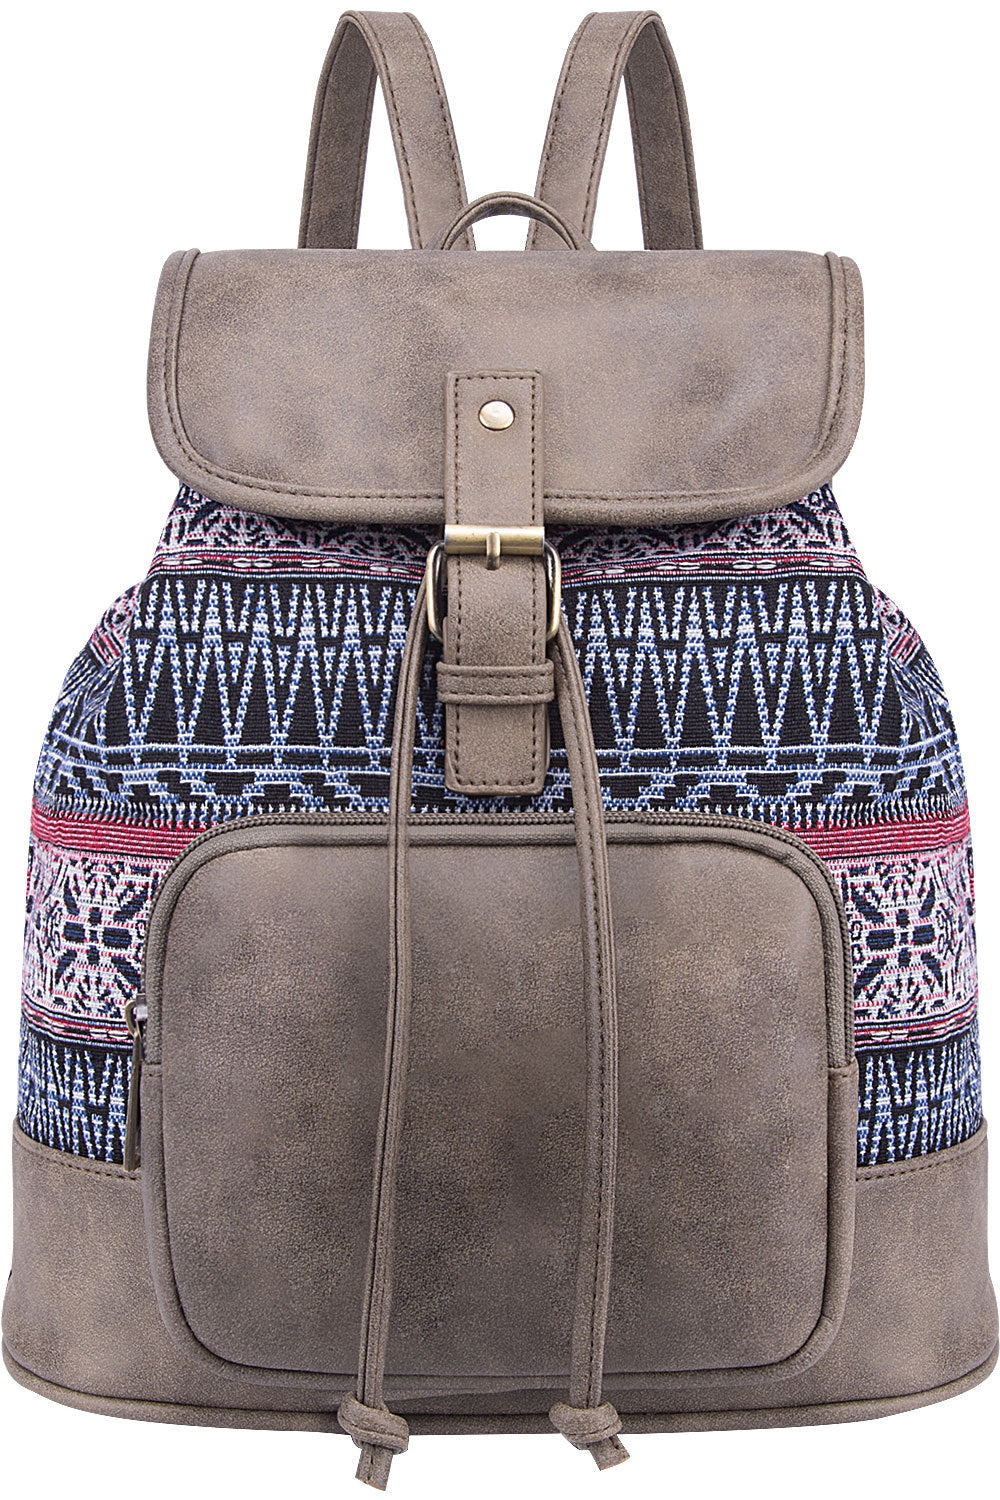 Casual Bohemian Canvas Backpacks for Girls B520-Backpacks-Blue-Free Shipping Leatheretro